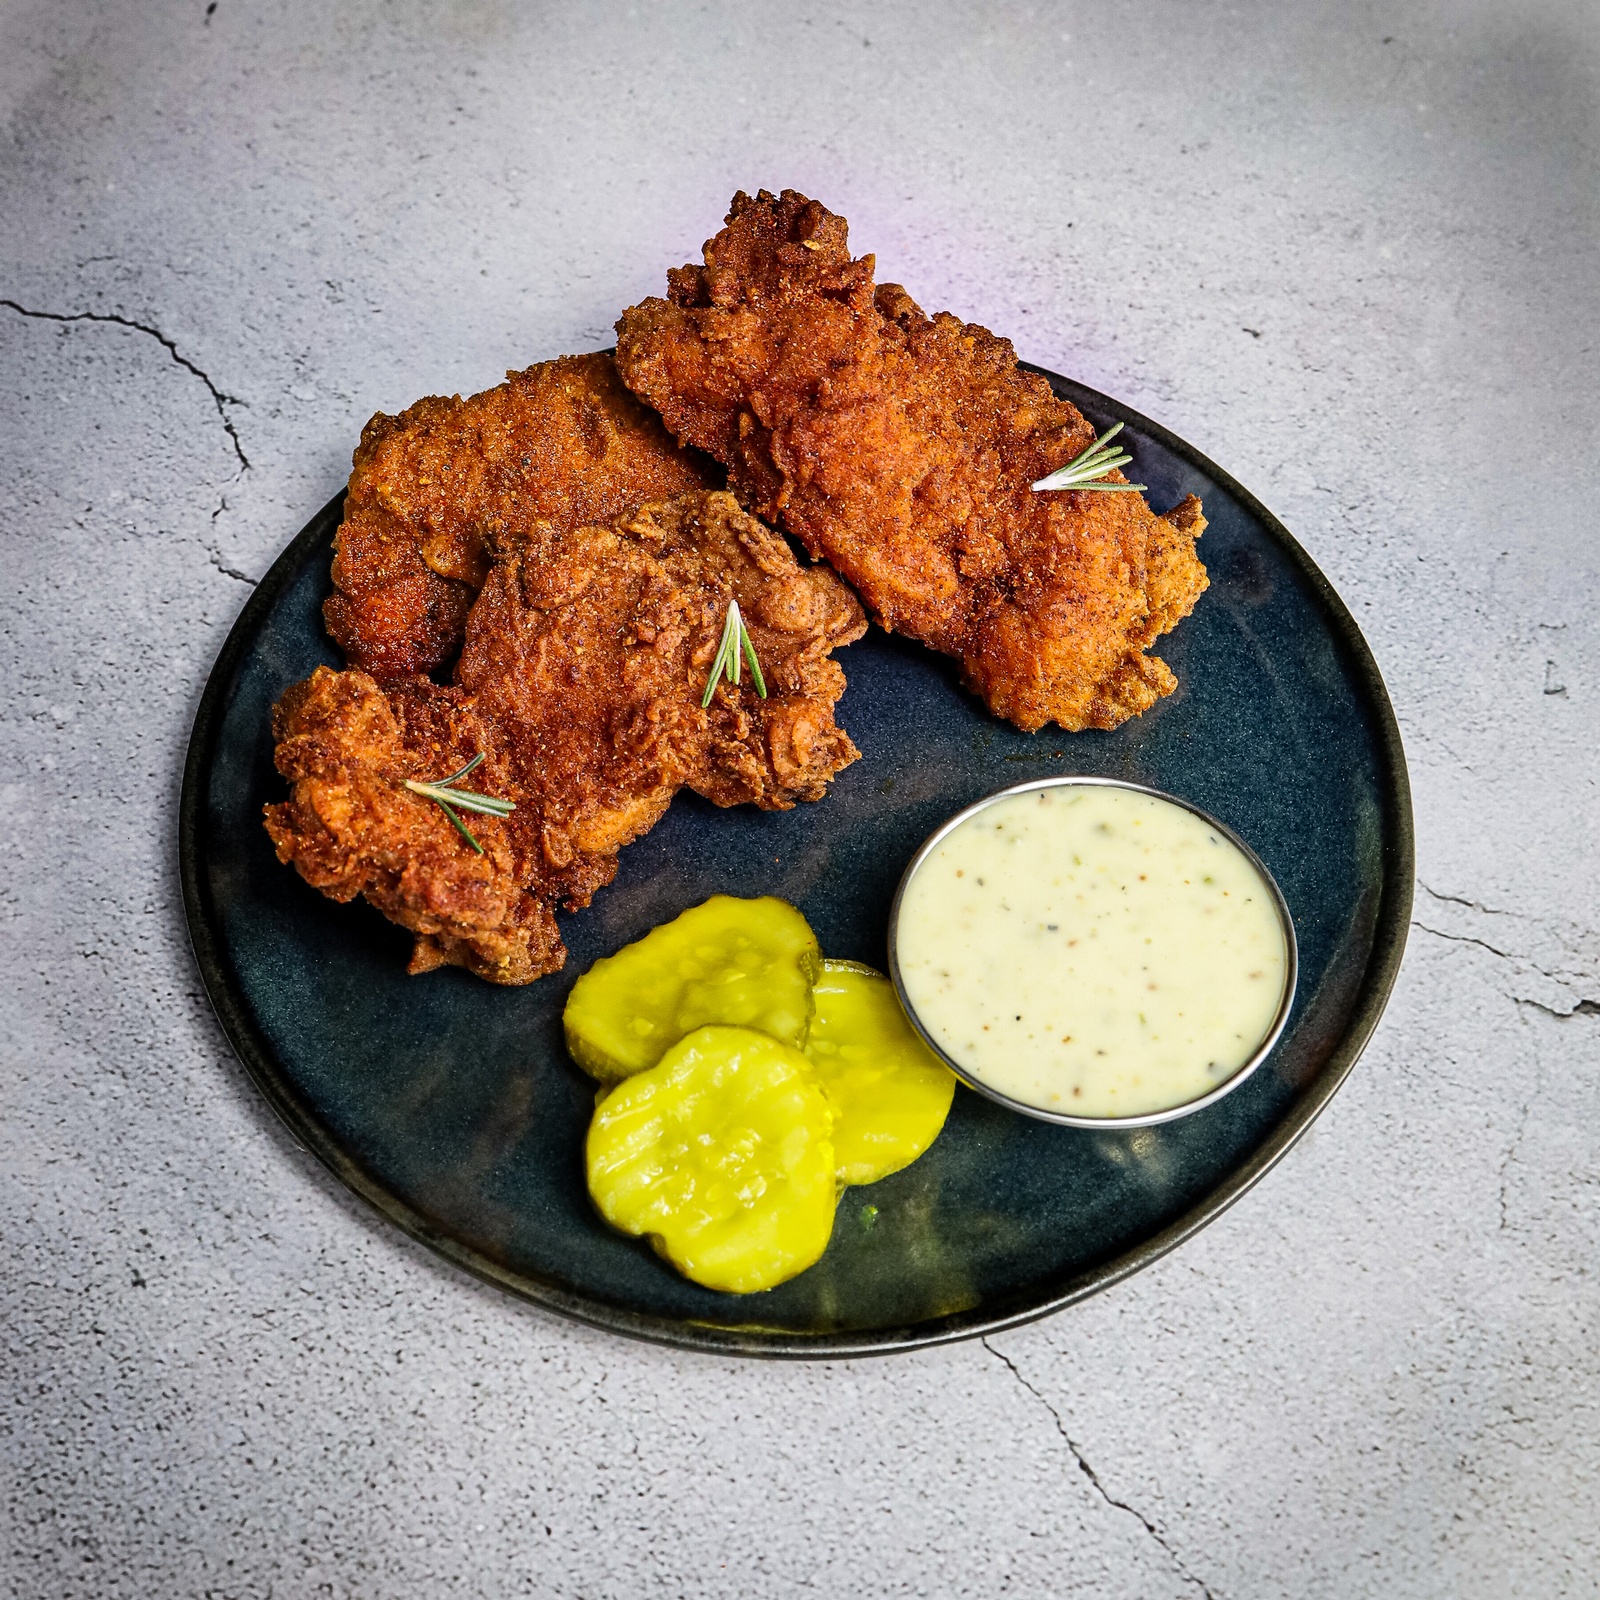 Sector 7 Fried Chicken